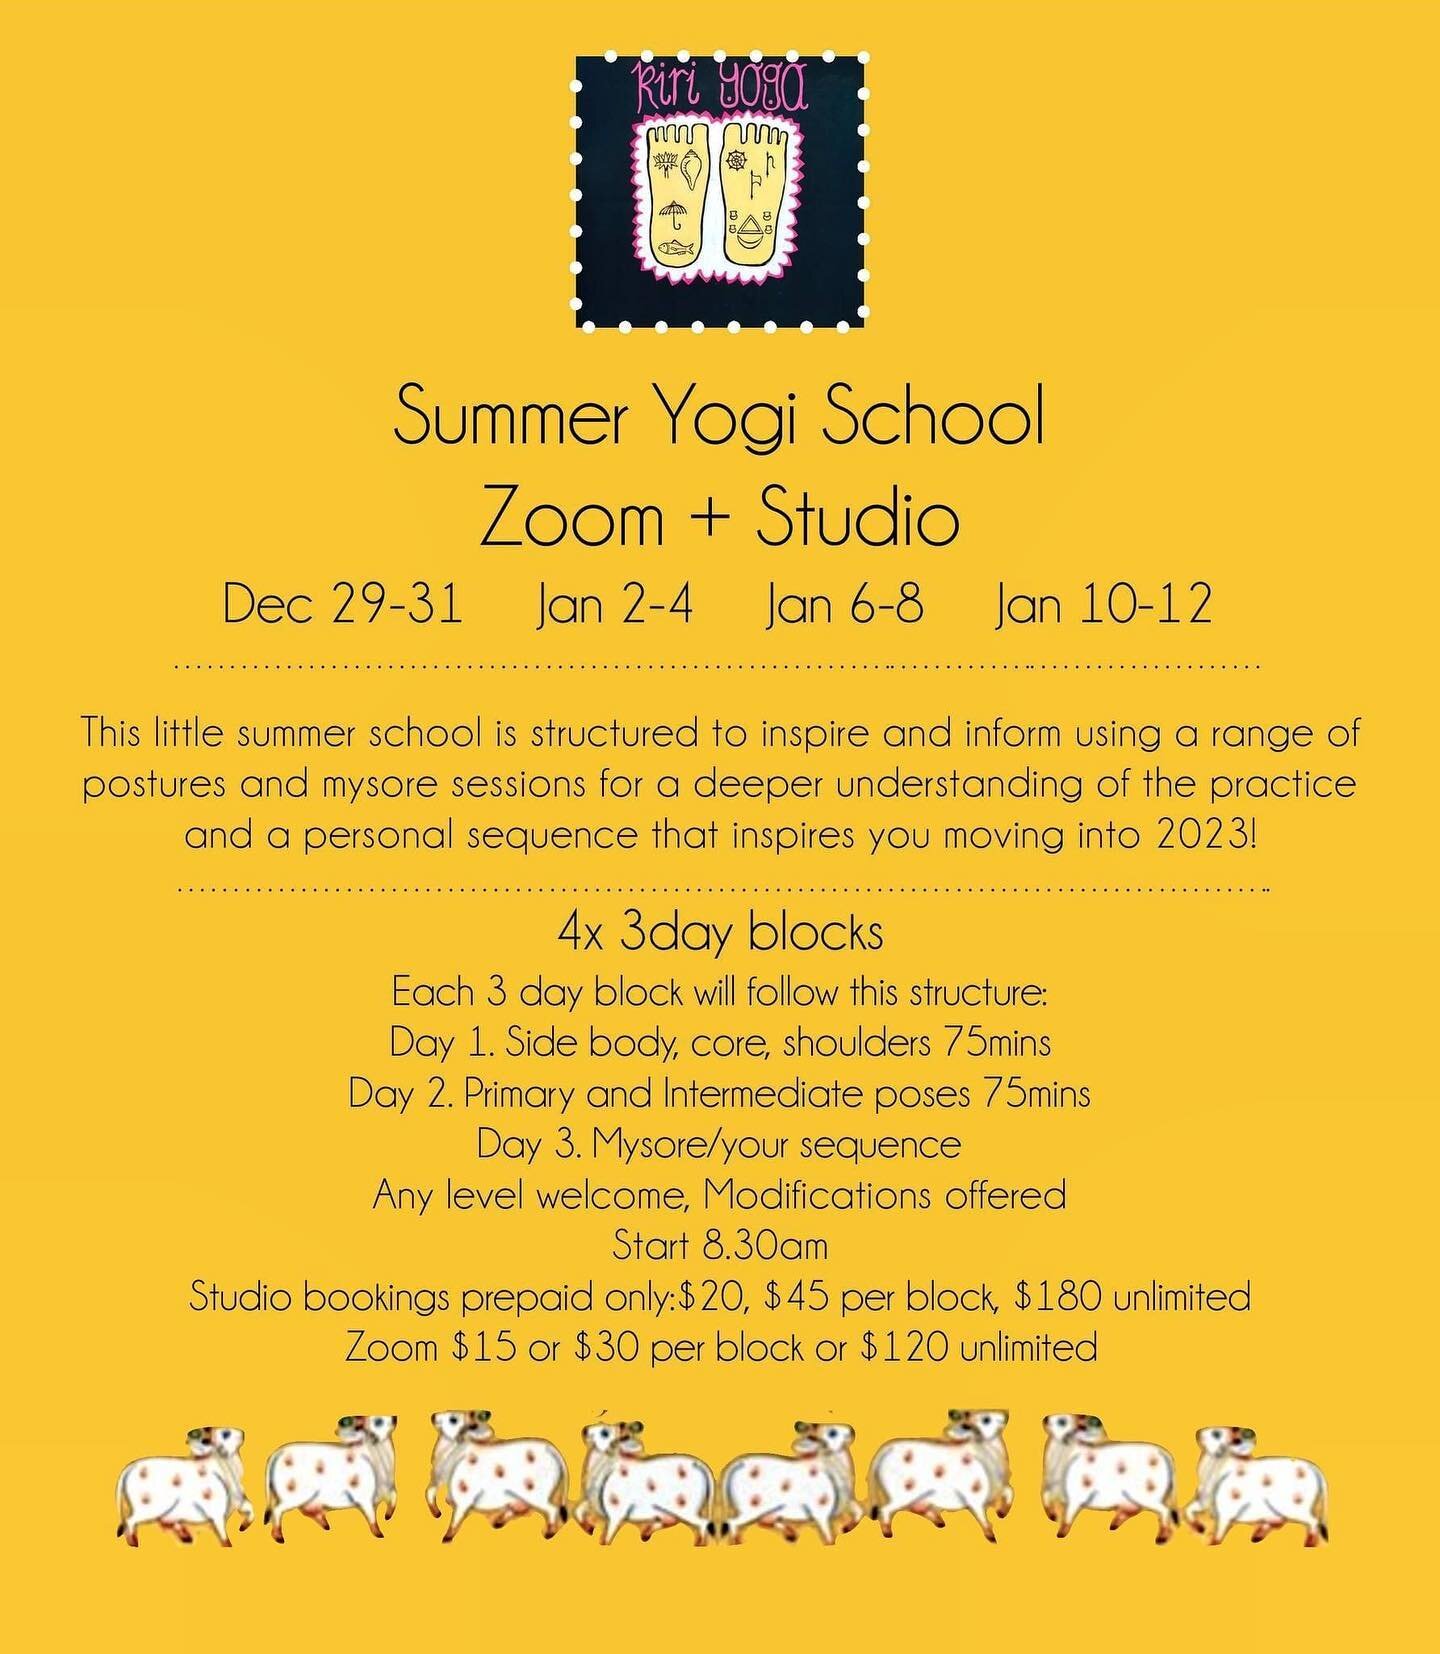 Summer Yogi School 
Zoom + Studio
Dec 29-31,  Jan 2-4,  Jan 6-8,  Jan 10-12 

This little summer school is structured to inspire and inform using a range of postures and mysore sessions for a deeper understanding of the practice and a personal sequen